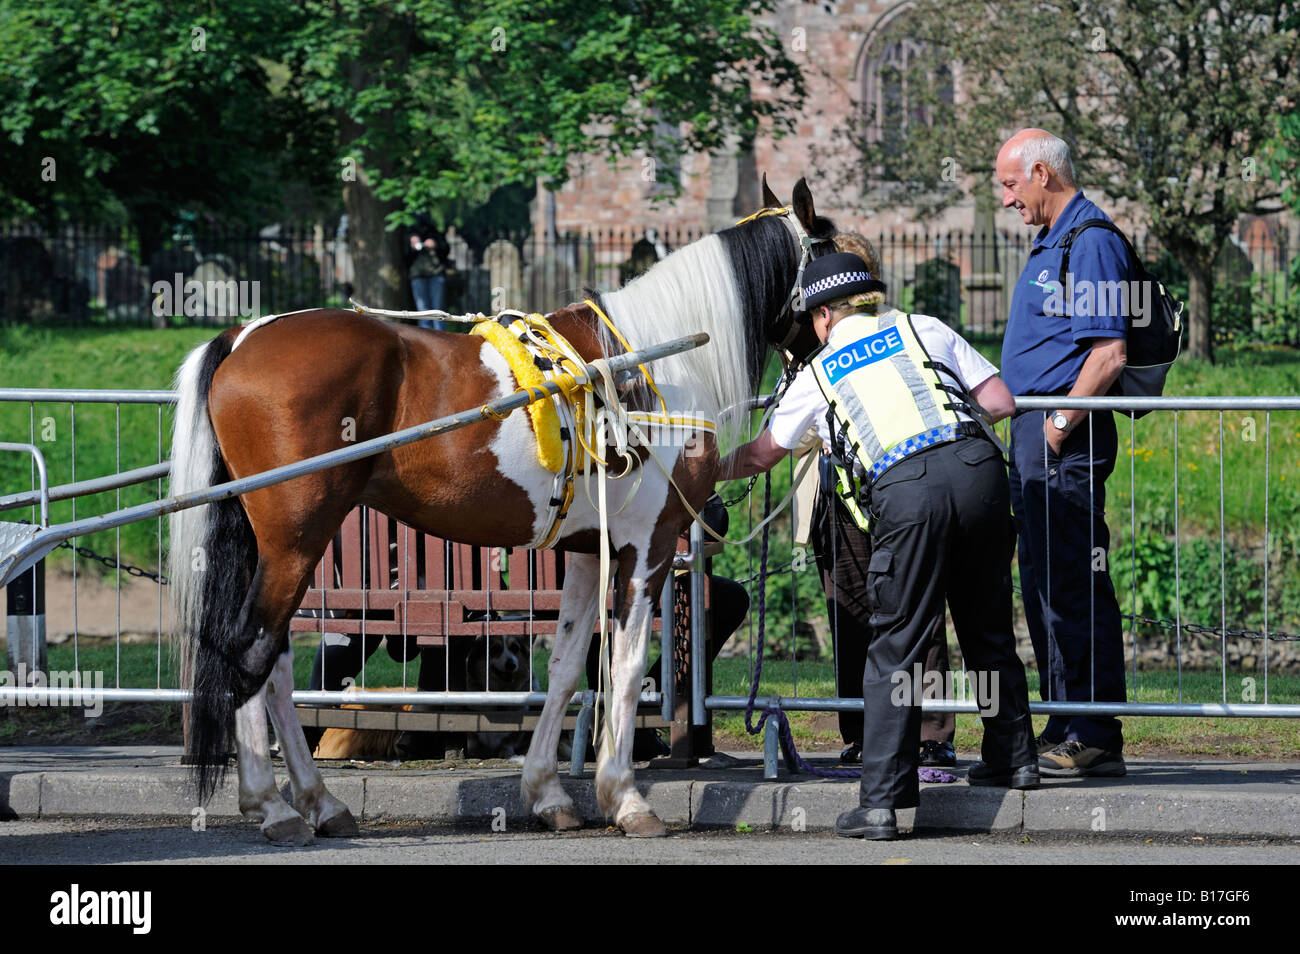 Police and public concern at condition of a horse. Appleby Horse Fair. Appleby-in-Westmorland, Cumbria, England, United Kingdom. Stock Photo